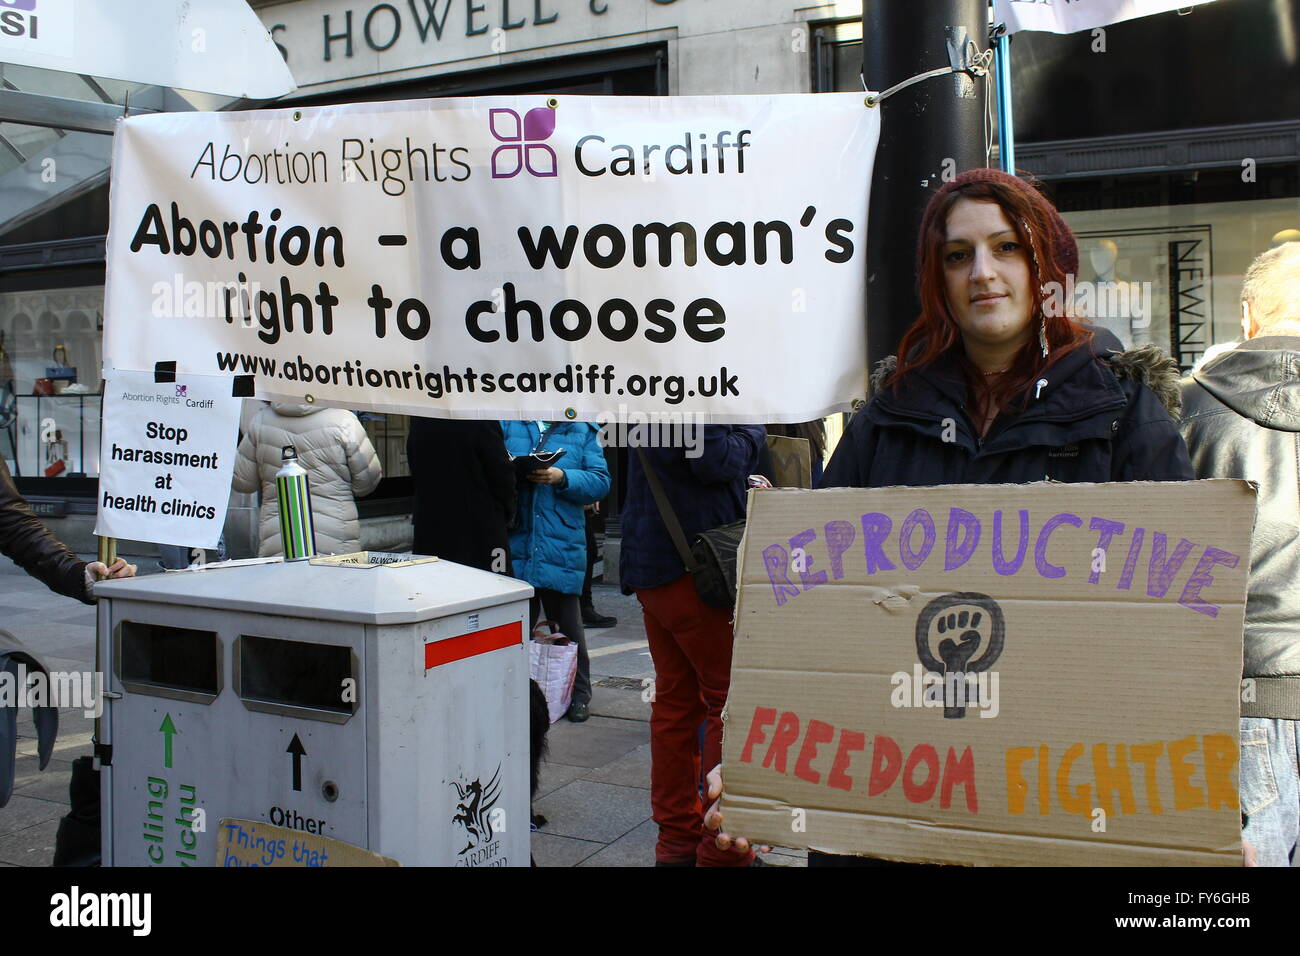 Cardiff Wales, 18/02/2016, Photographs taken of Tia Gibbon a 27 year old Cardiff native who is protesting for women's reproductive rights with the group Abortion Rights Cardiff. ©AimeeHerd Freelance Stock Photo